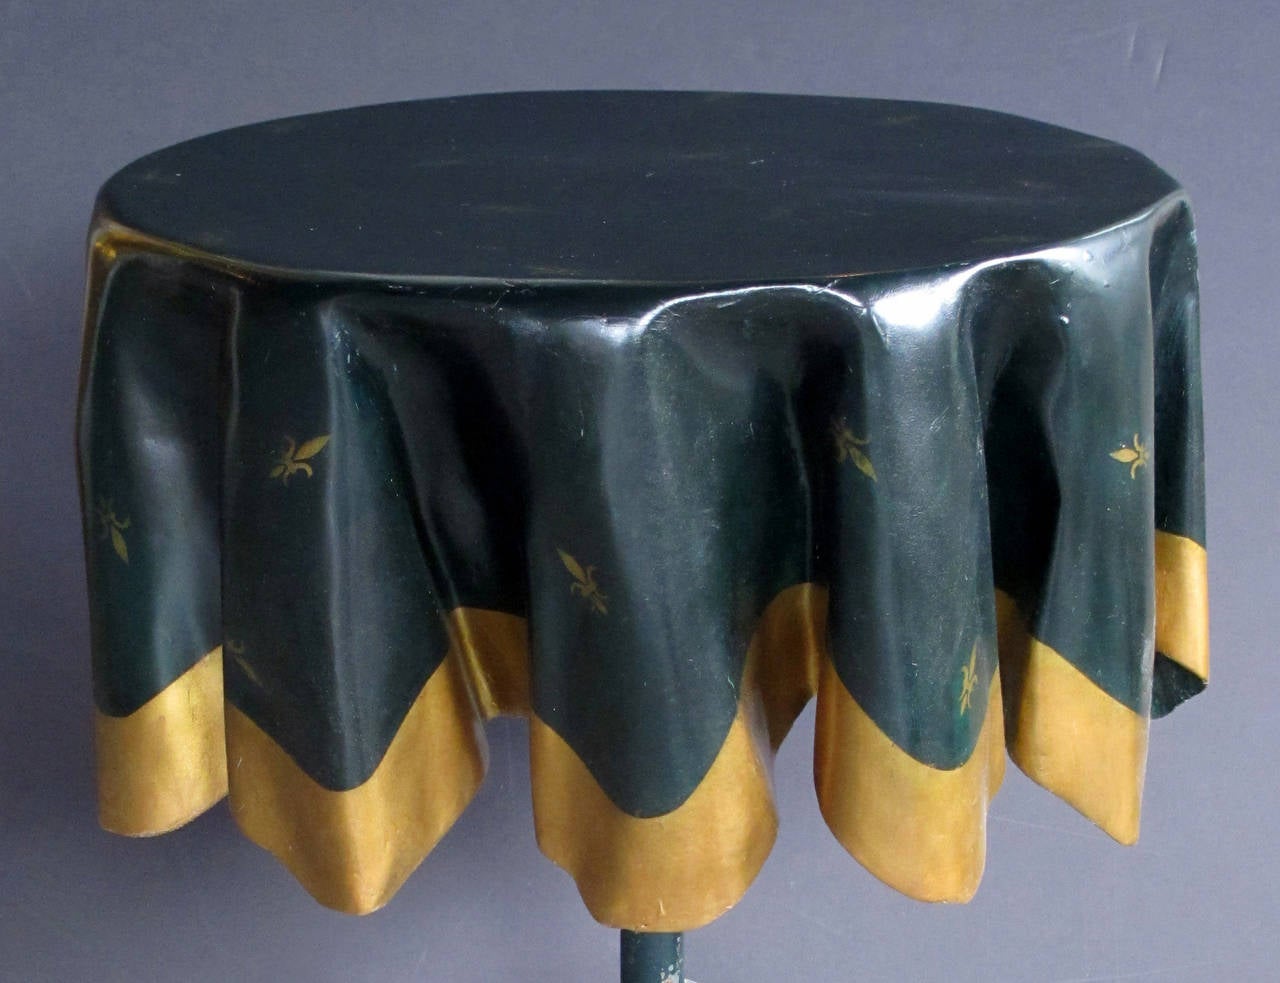 A whimsical French 1960s fiberglass 'drapery' table with iron tripod base; the winter green fiberglass top depicting a draped tablecloth adorned with gilt fleur-de-lis decoration; raised on an iron tripod stand.